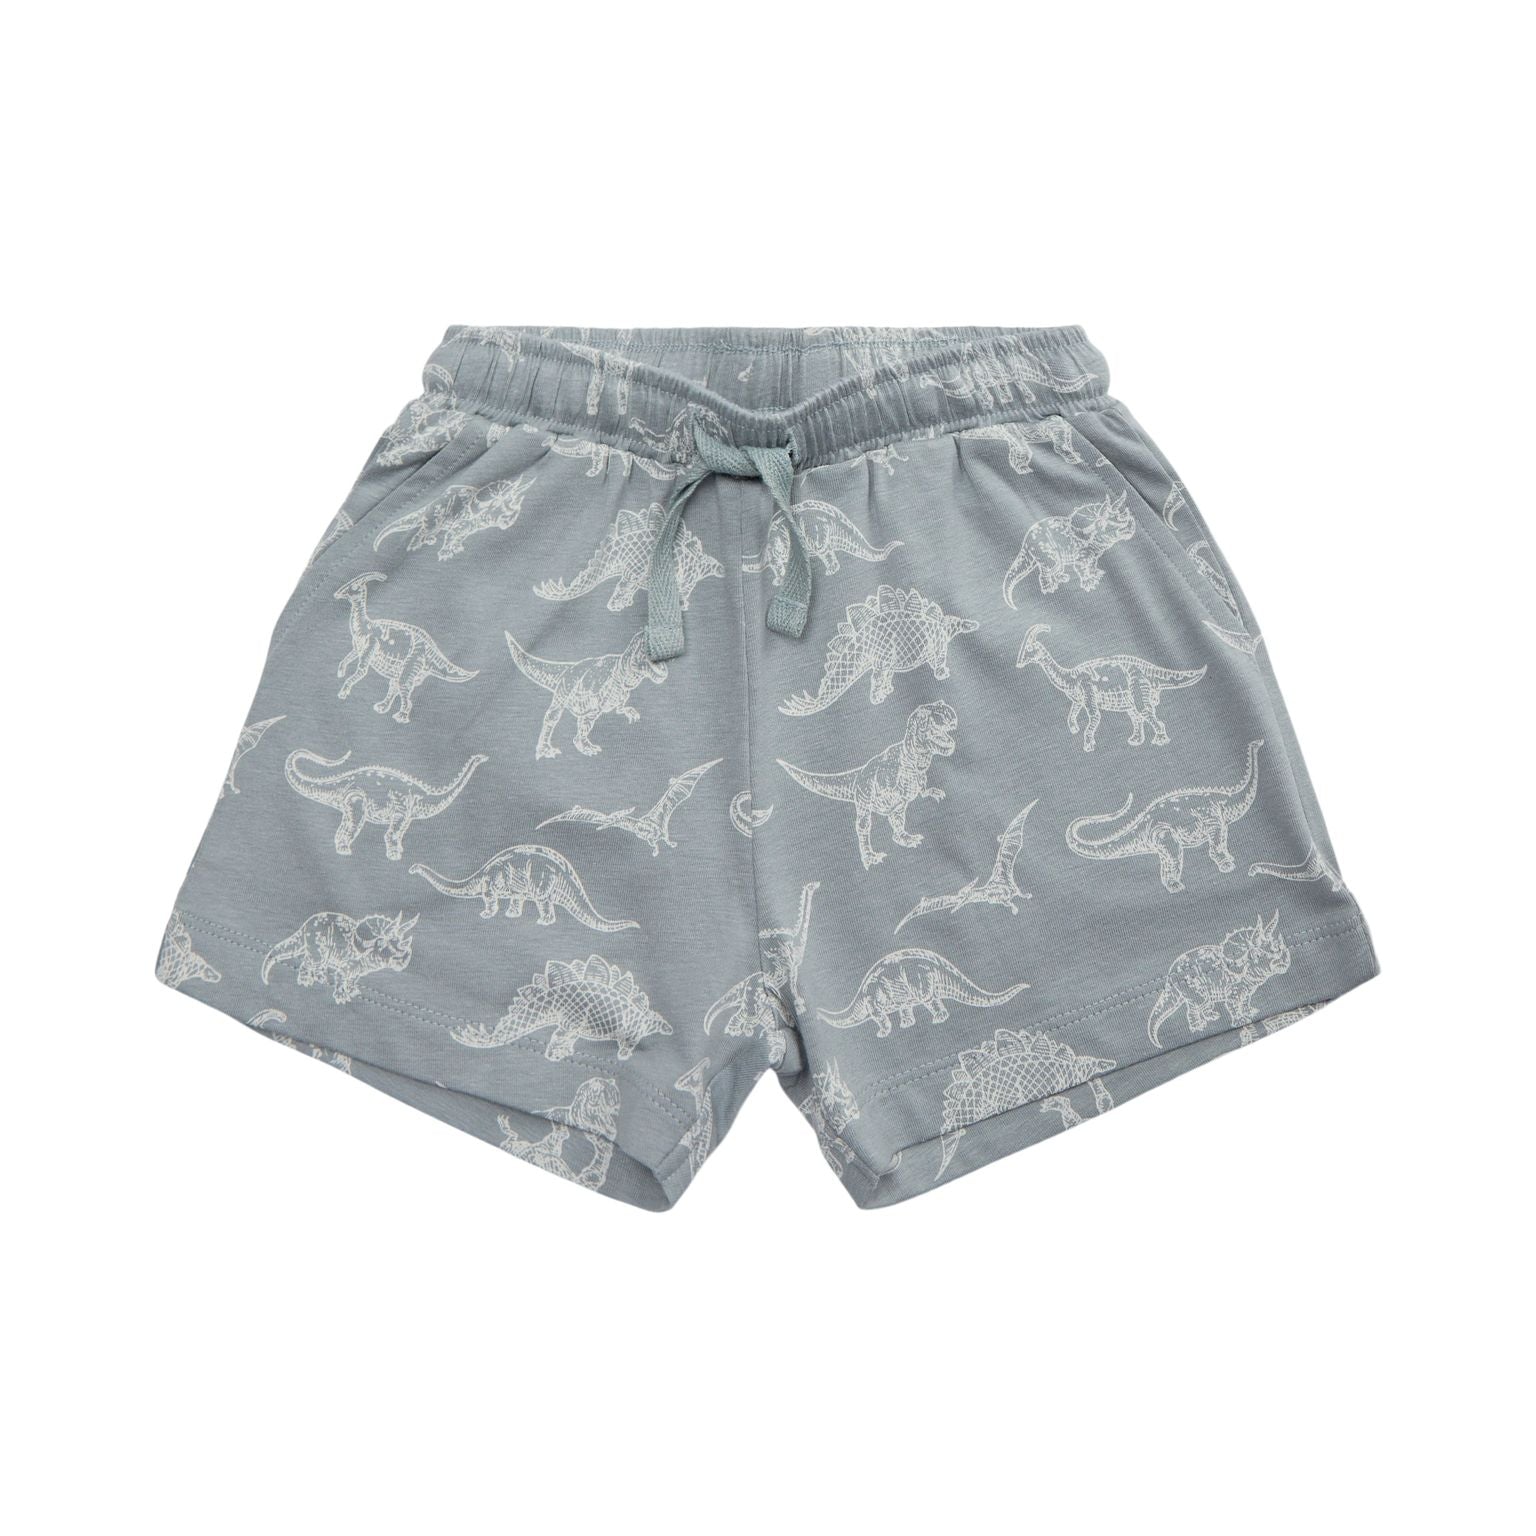 Shorts, Dino print, Dusty Blue, Petit by Sofie Schnoor